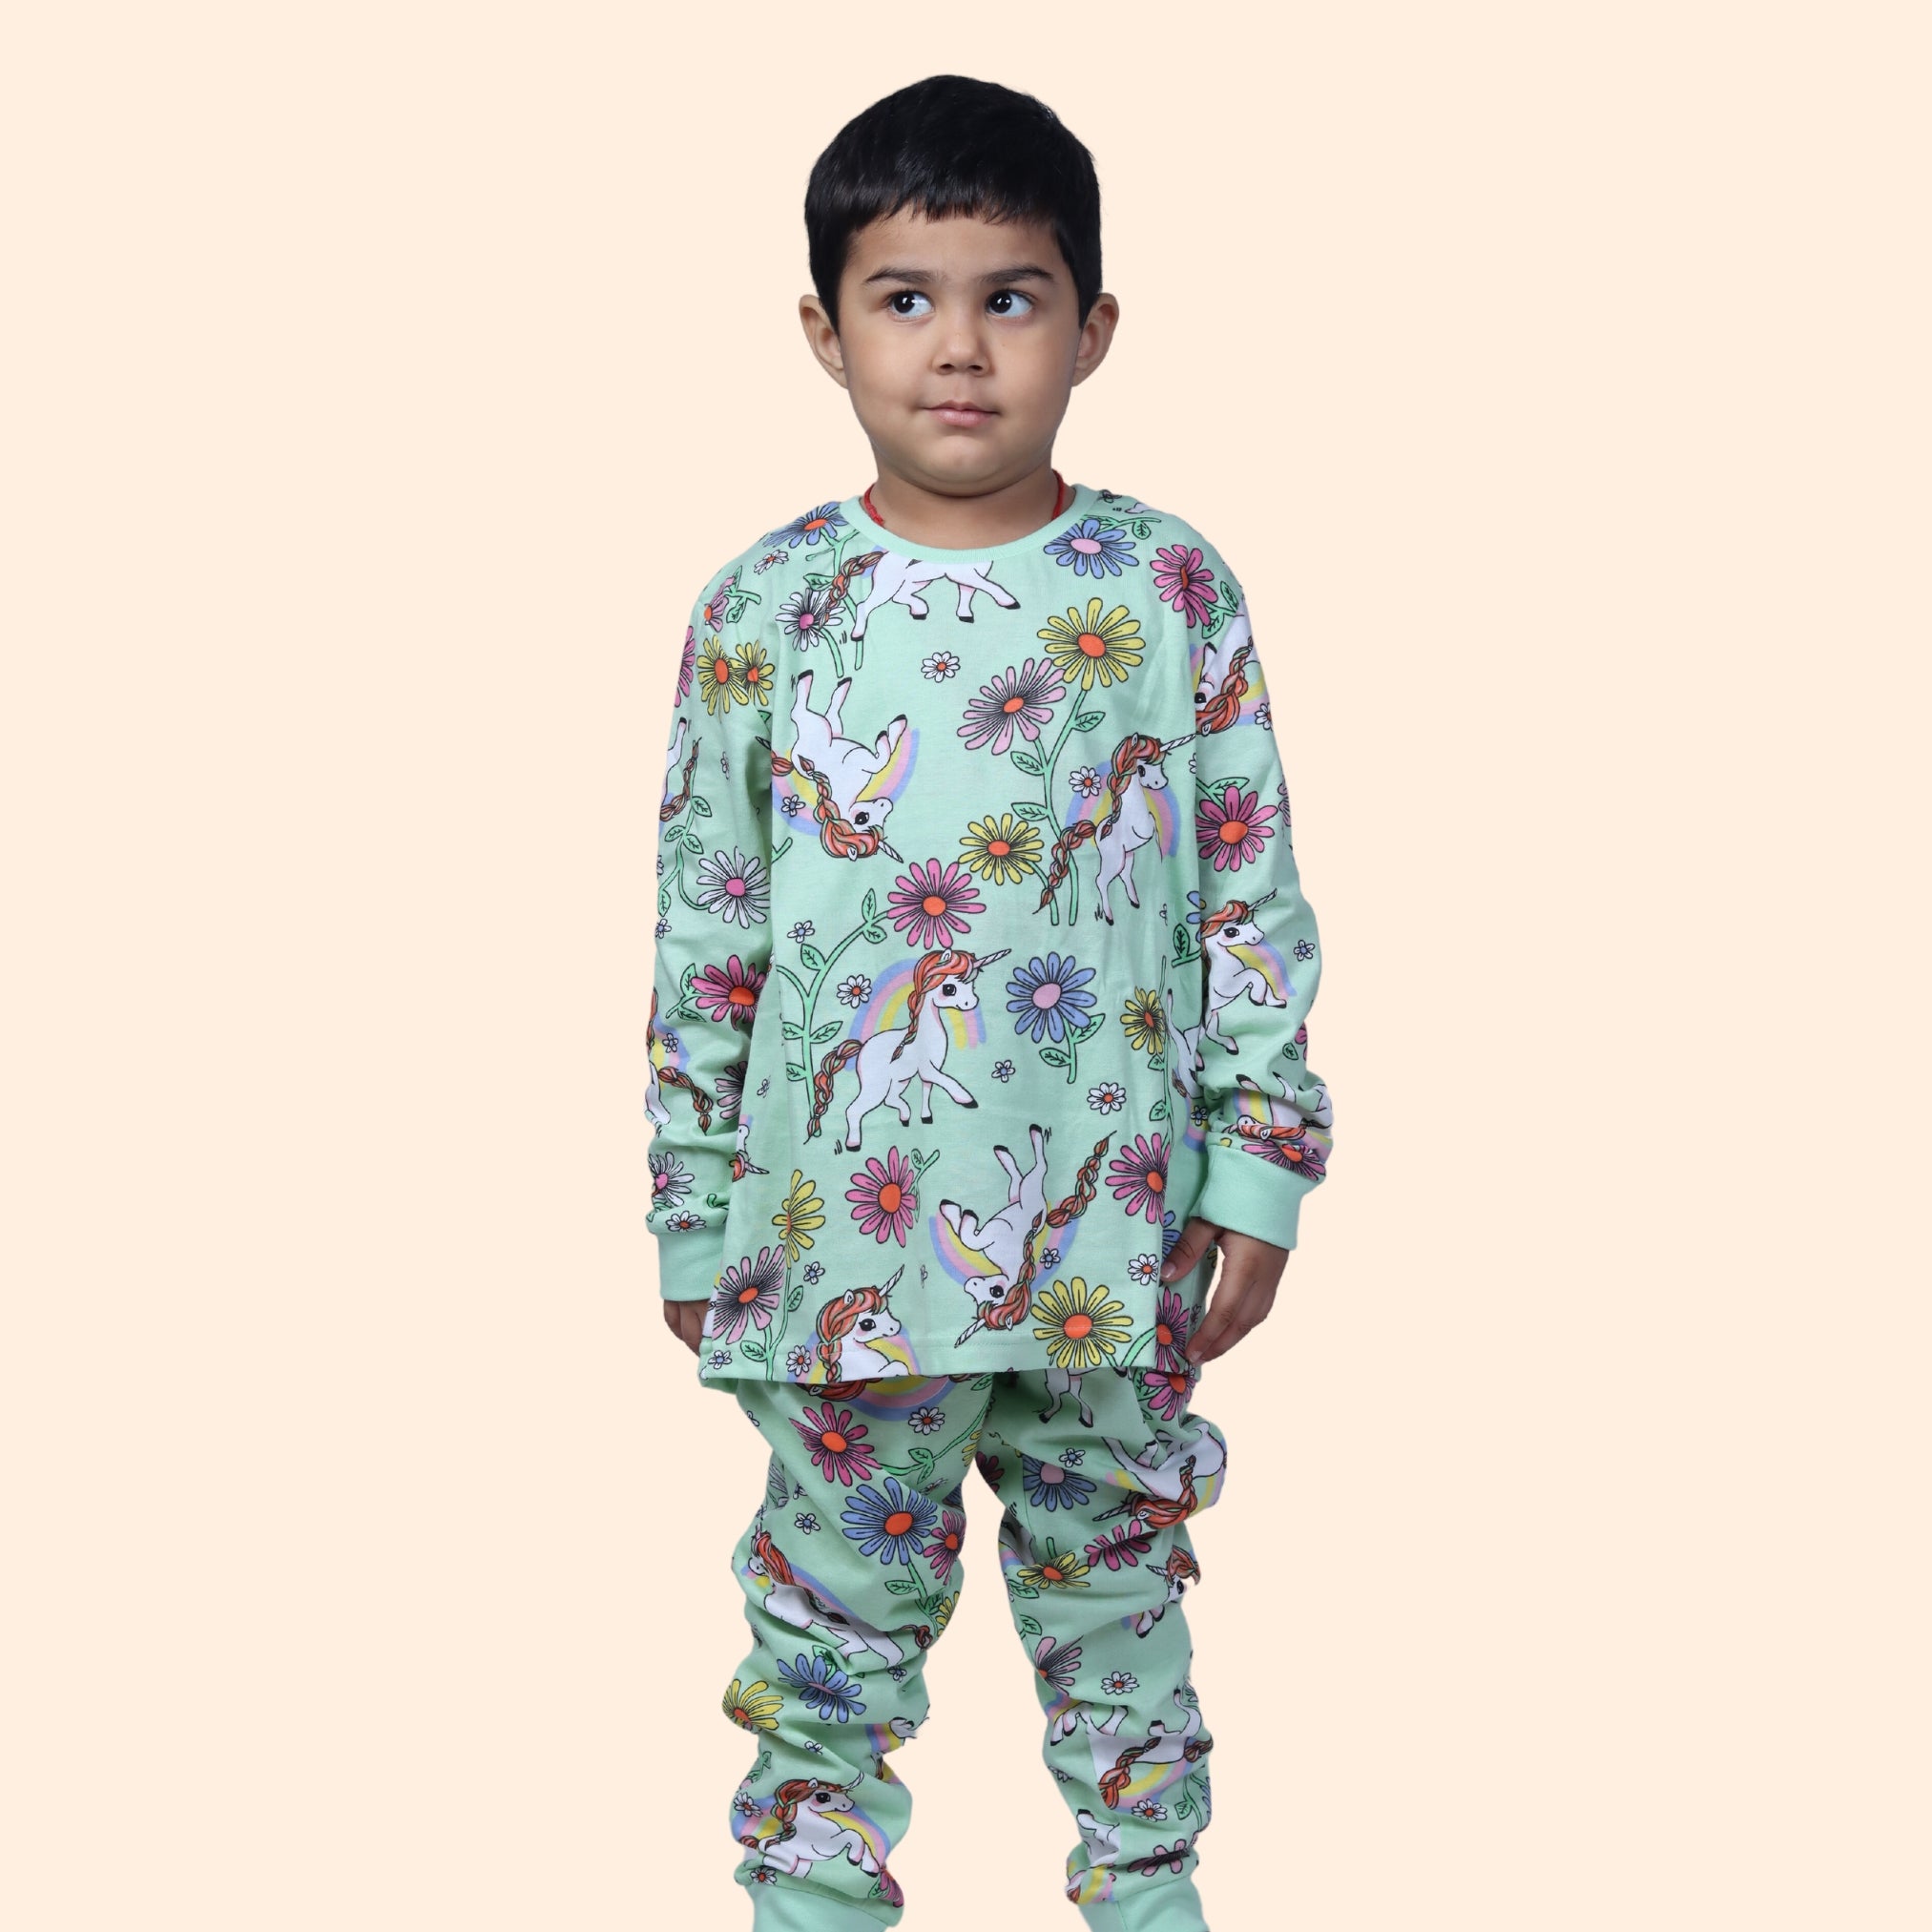 Full Sleeve Night Suit For Boy In Green Colour - Unicorn & Floral